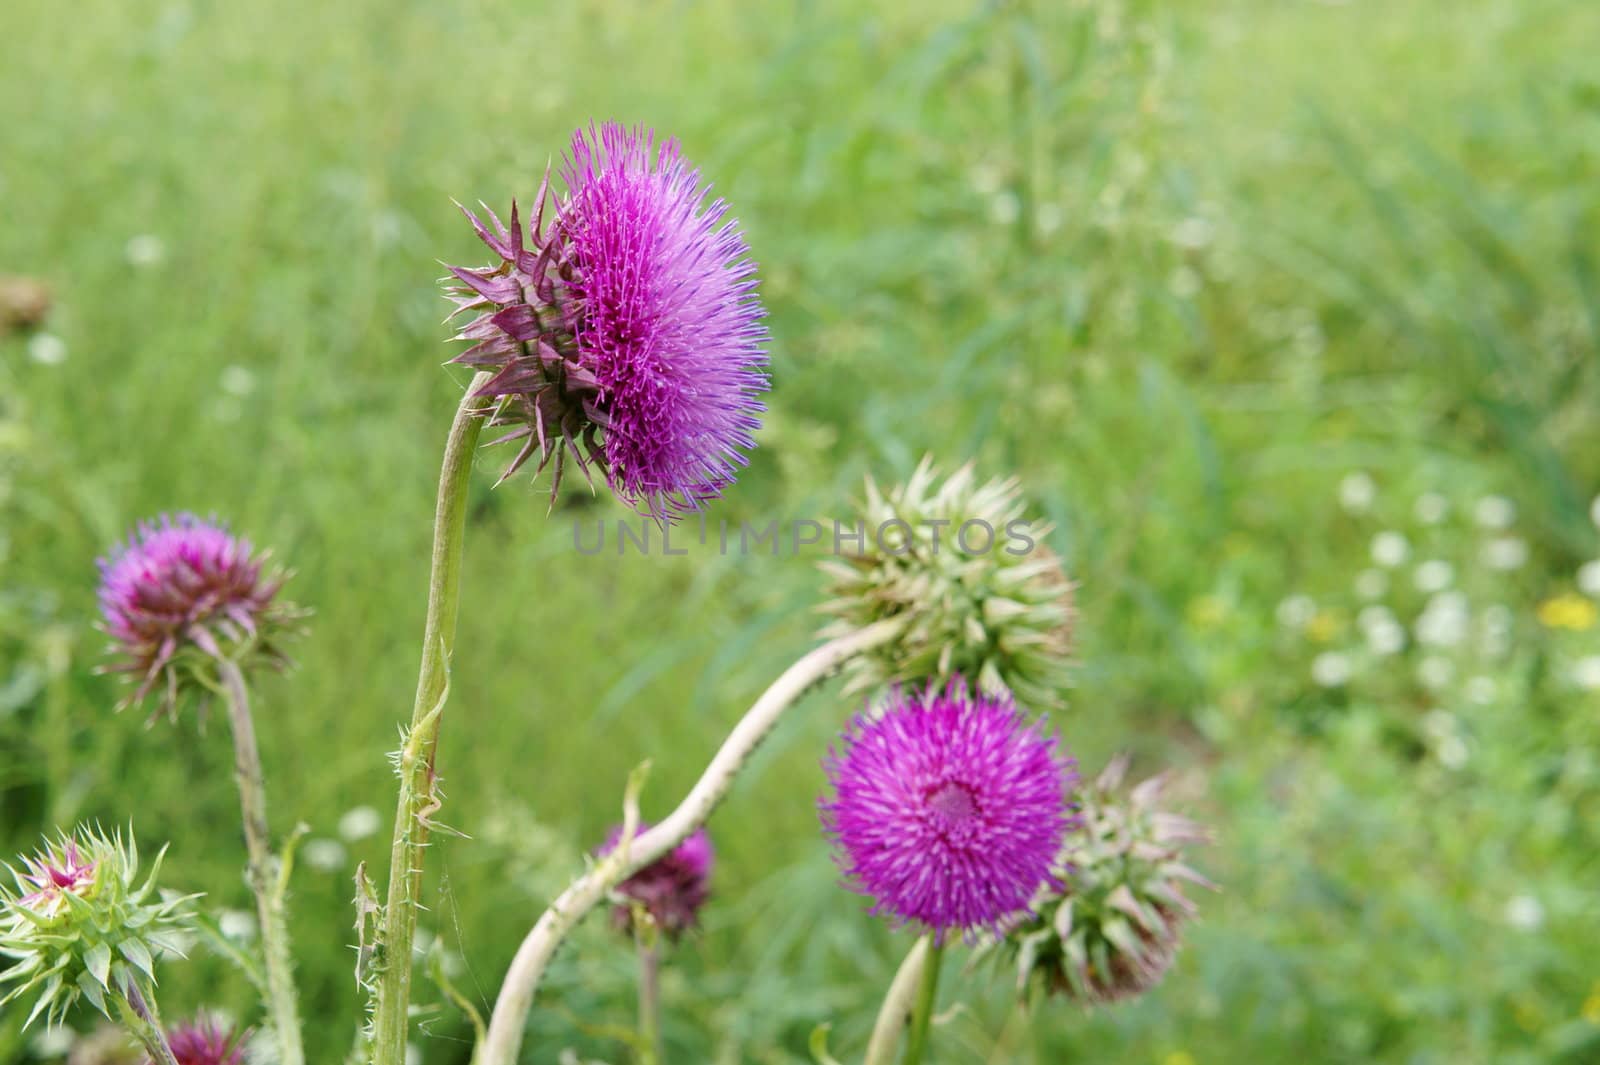 Pink thistle flowers in the grass in a sunny day.